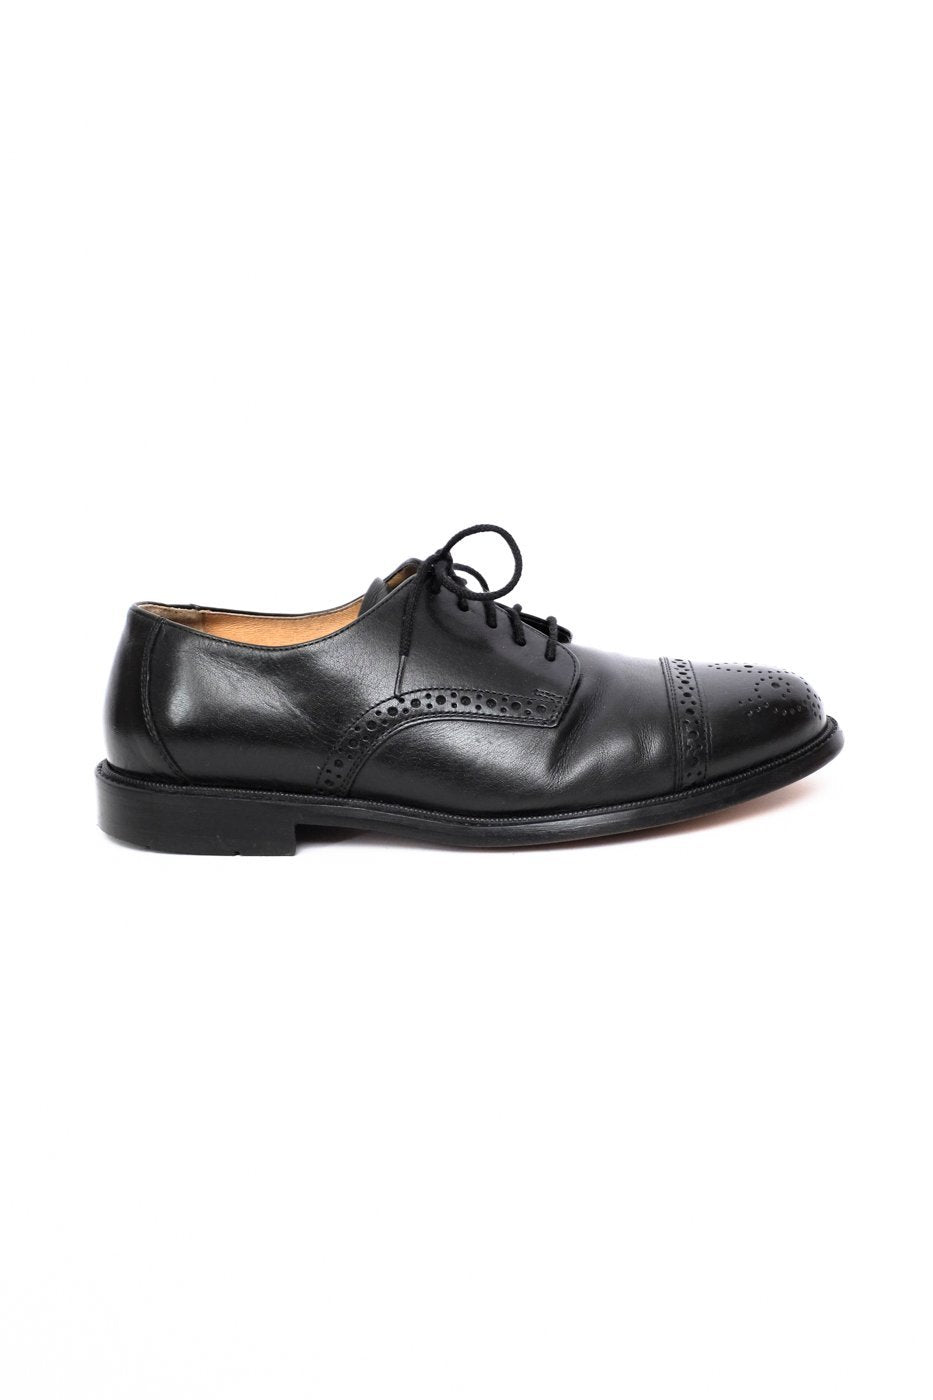 0402_BLACK 42 BUDAPESTER LEATHER BROGUES